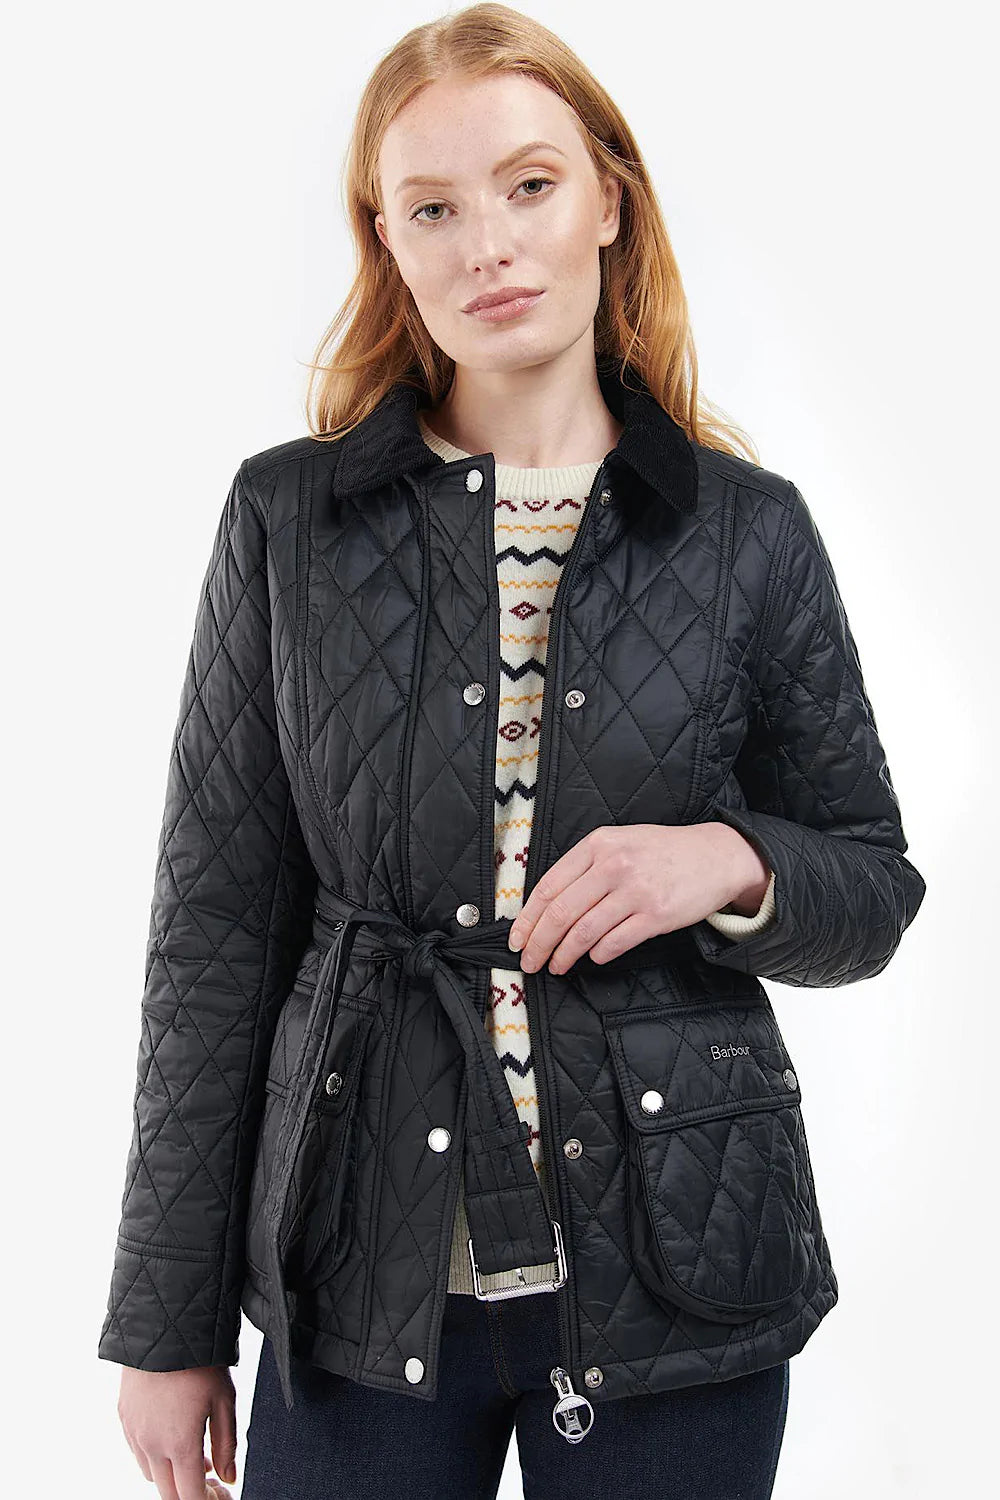 Barbour Fall Winter 22